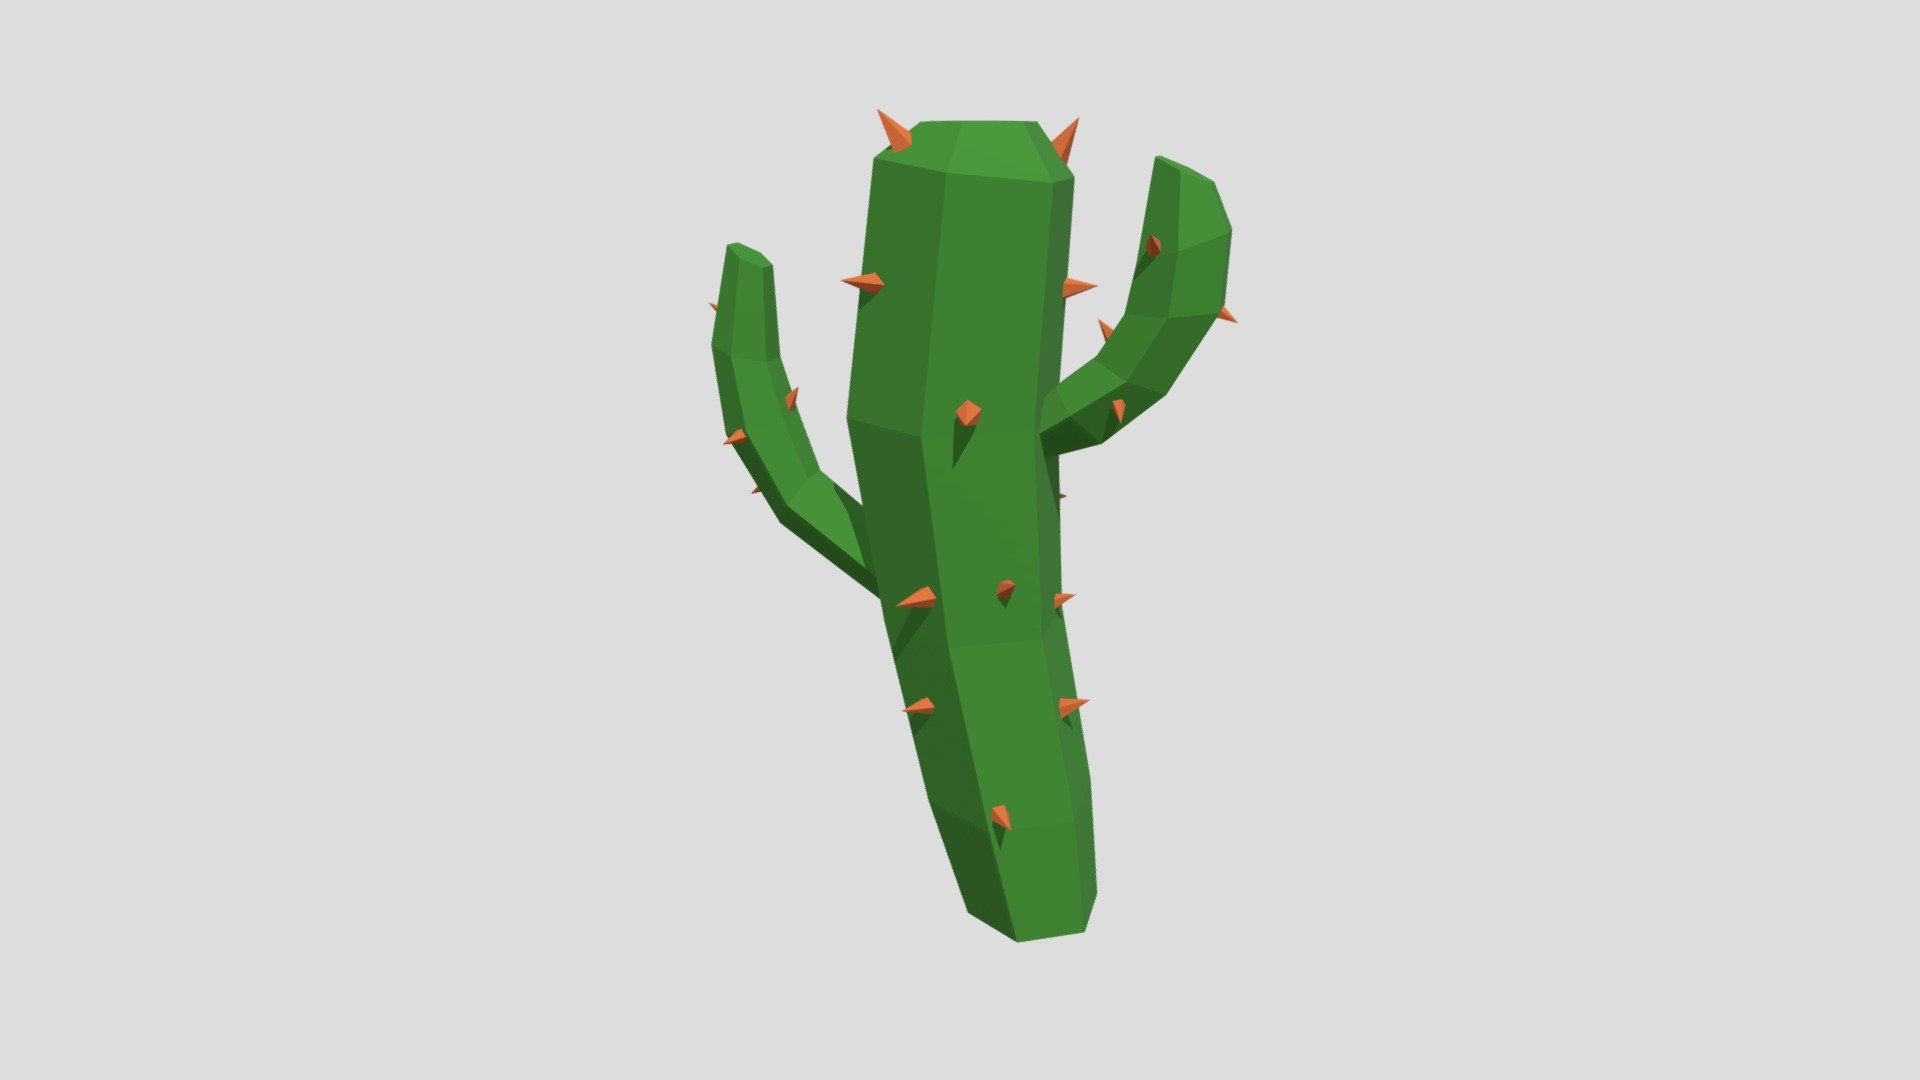 &ldquo;Introducing the Cactus, a stunning lowpoly model from &ldquo;PolyNature - Low Poly Nature Asset Pack